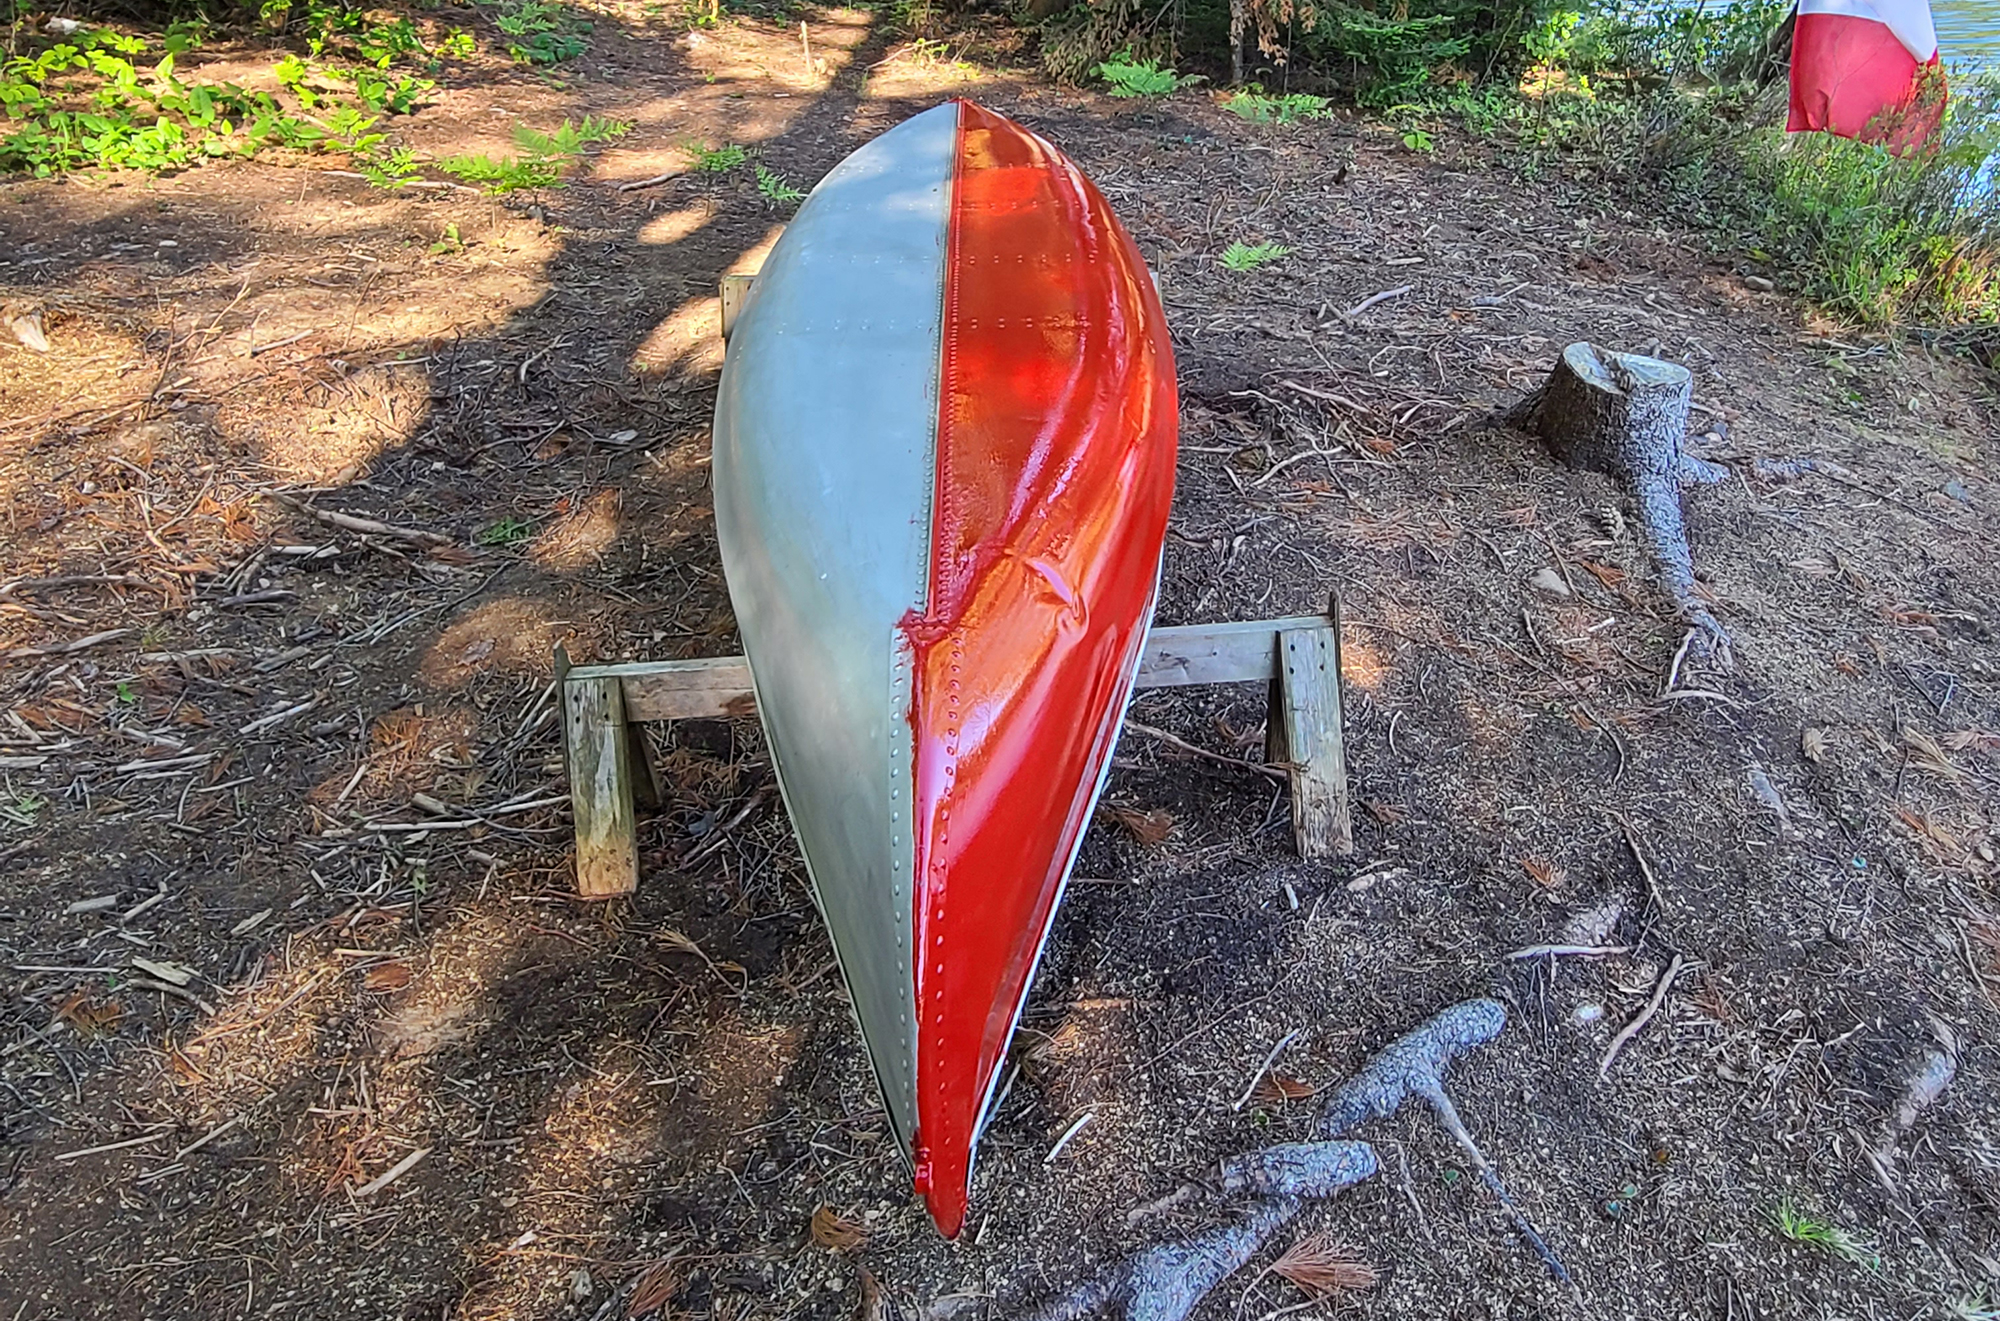 One half of canoe (right side) painted red.